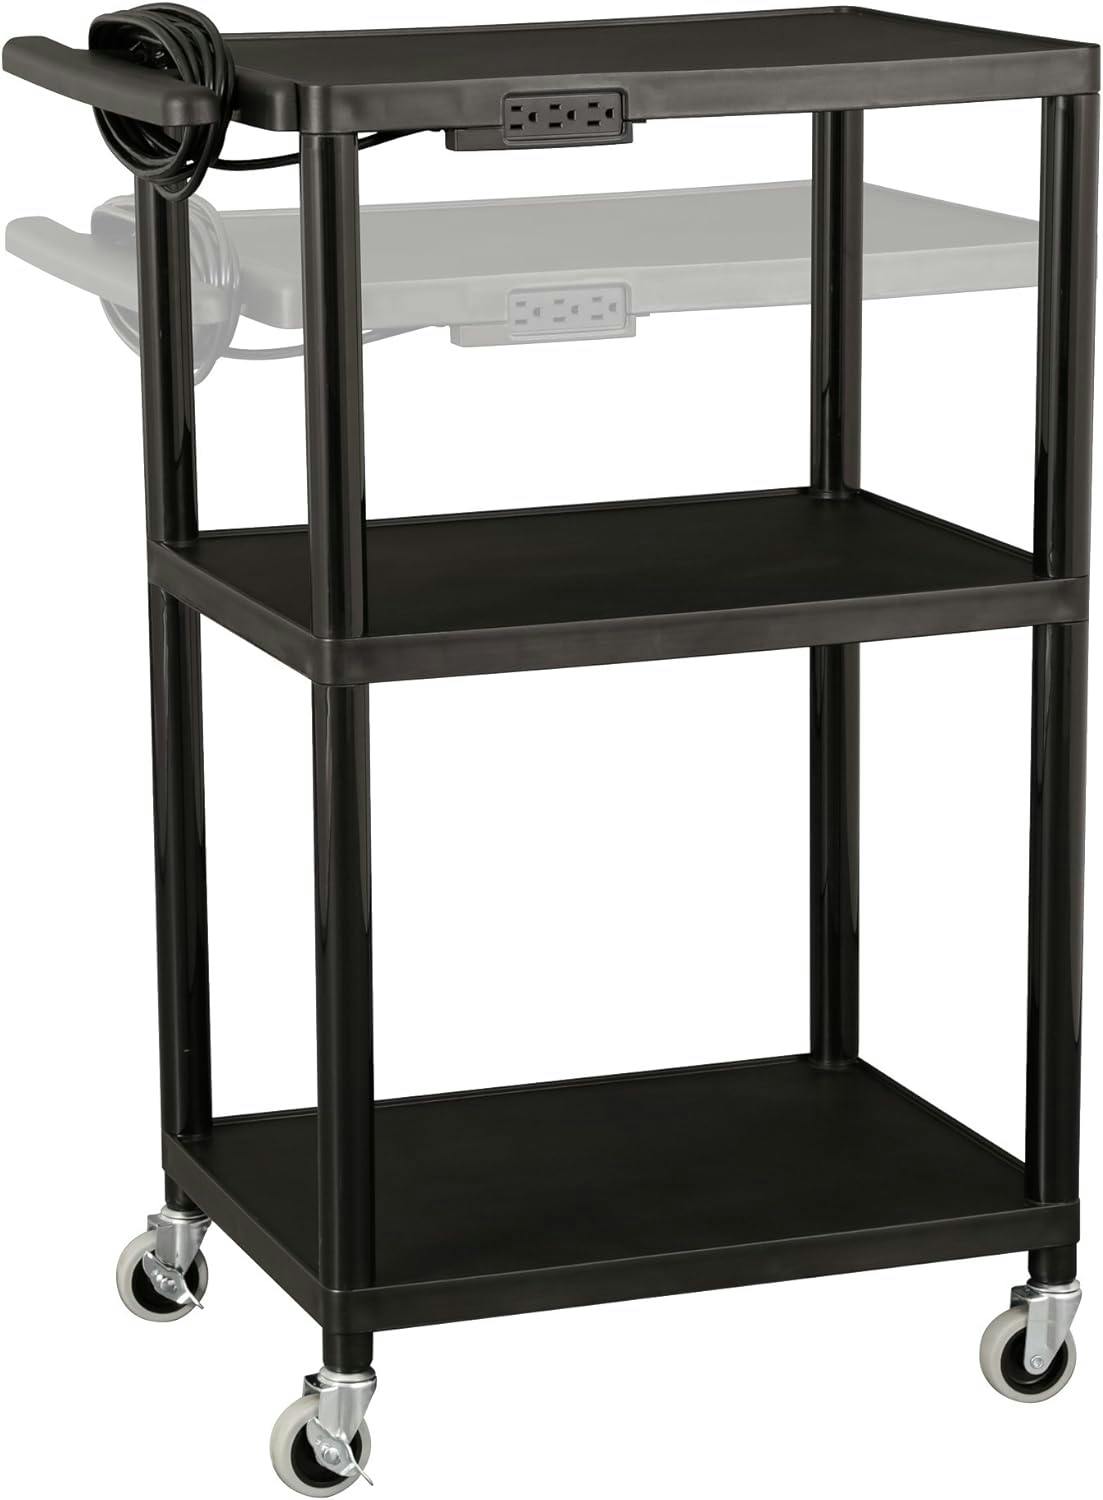 Versatile Mobile Utility Cart with Adjustable Shelves and Power Strip, Black